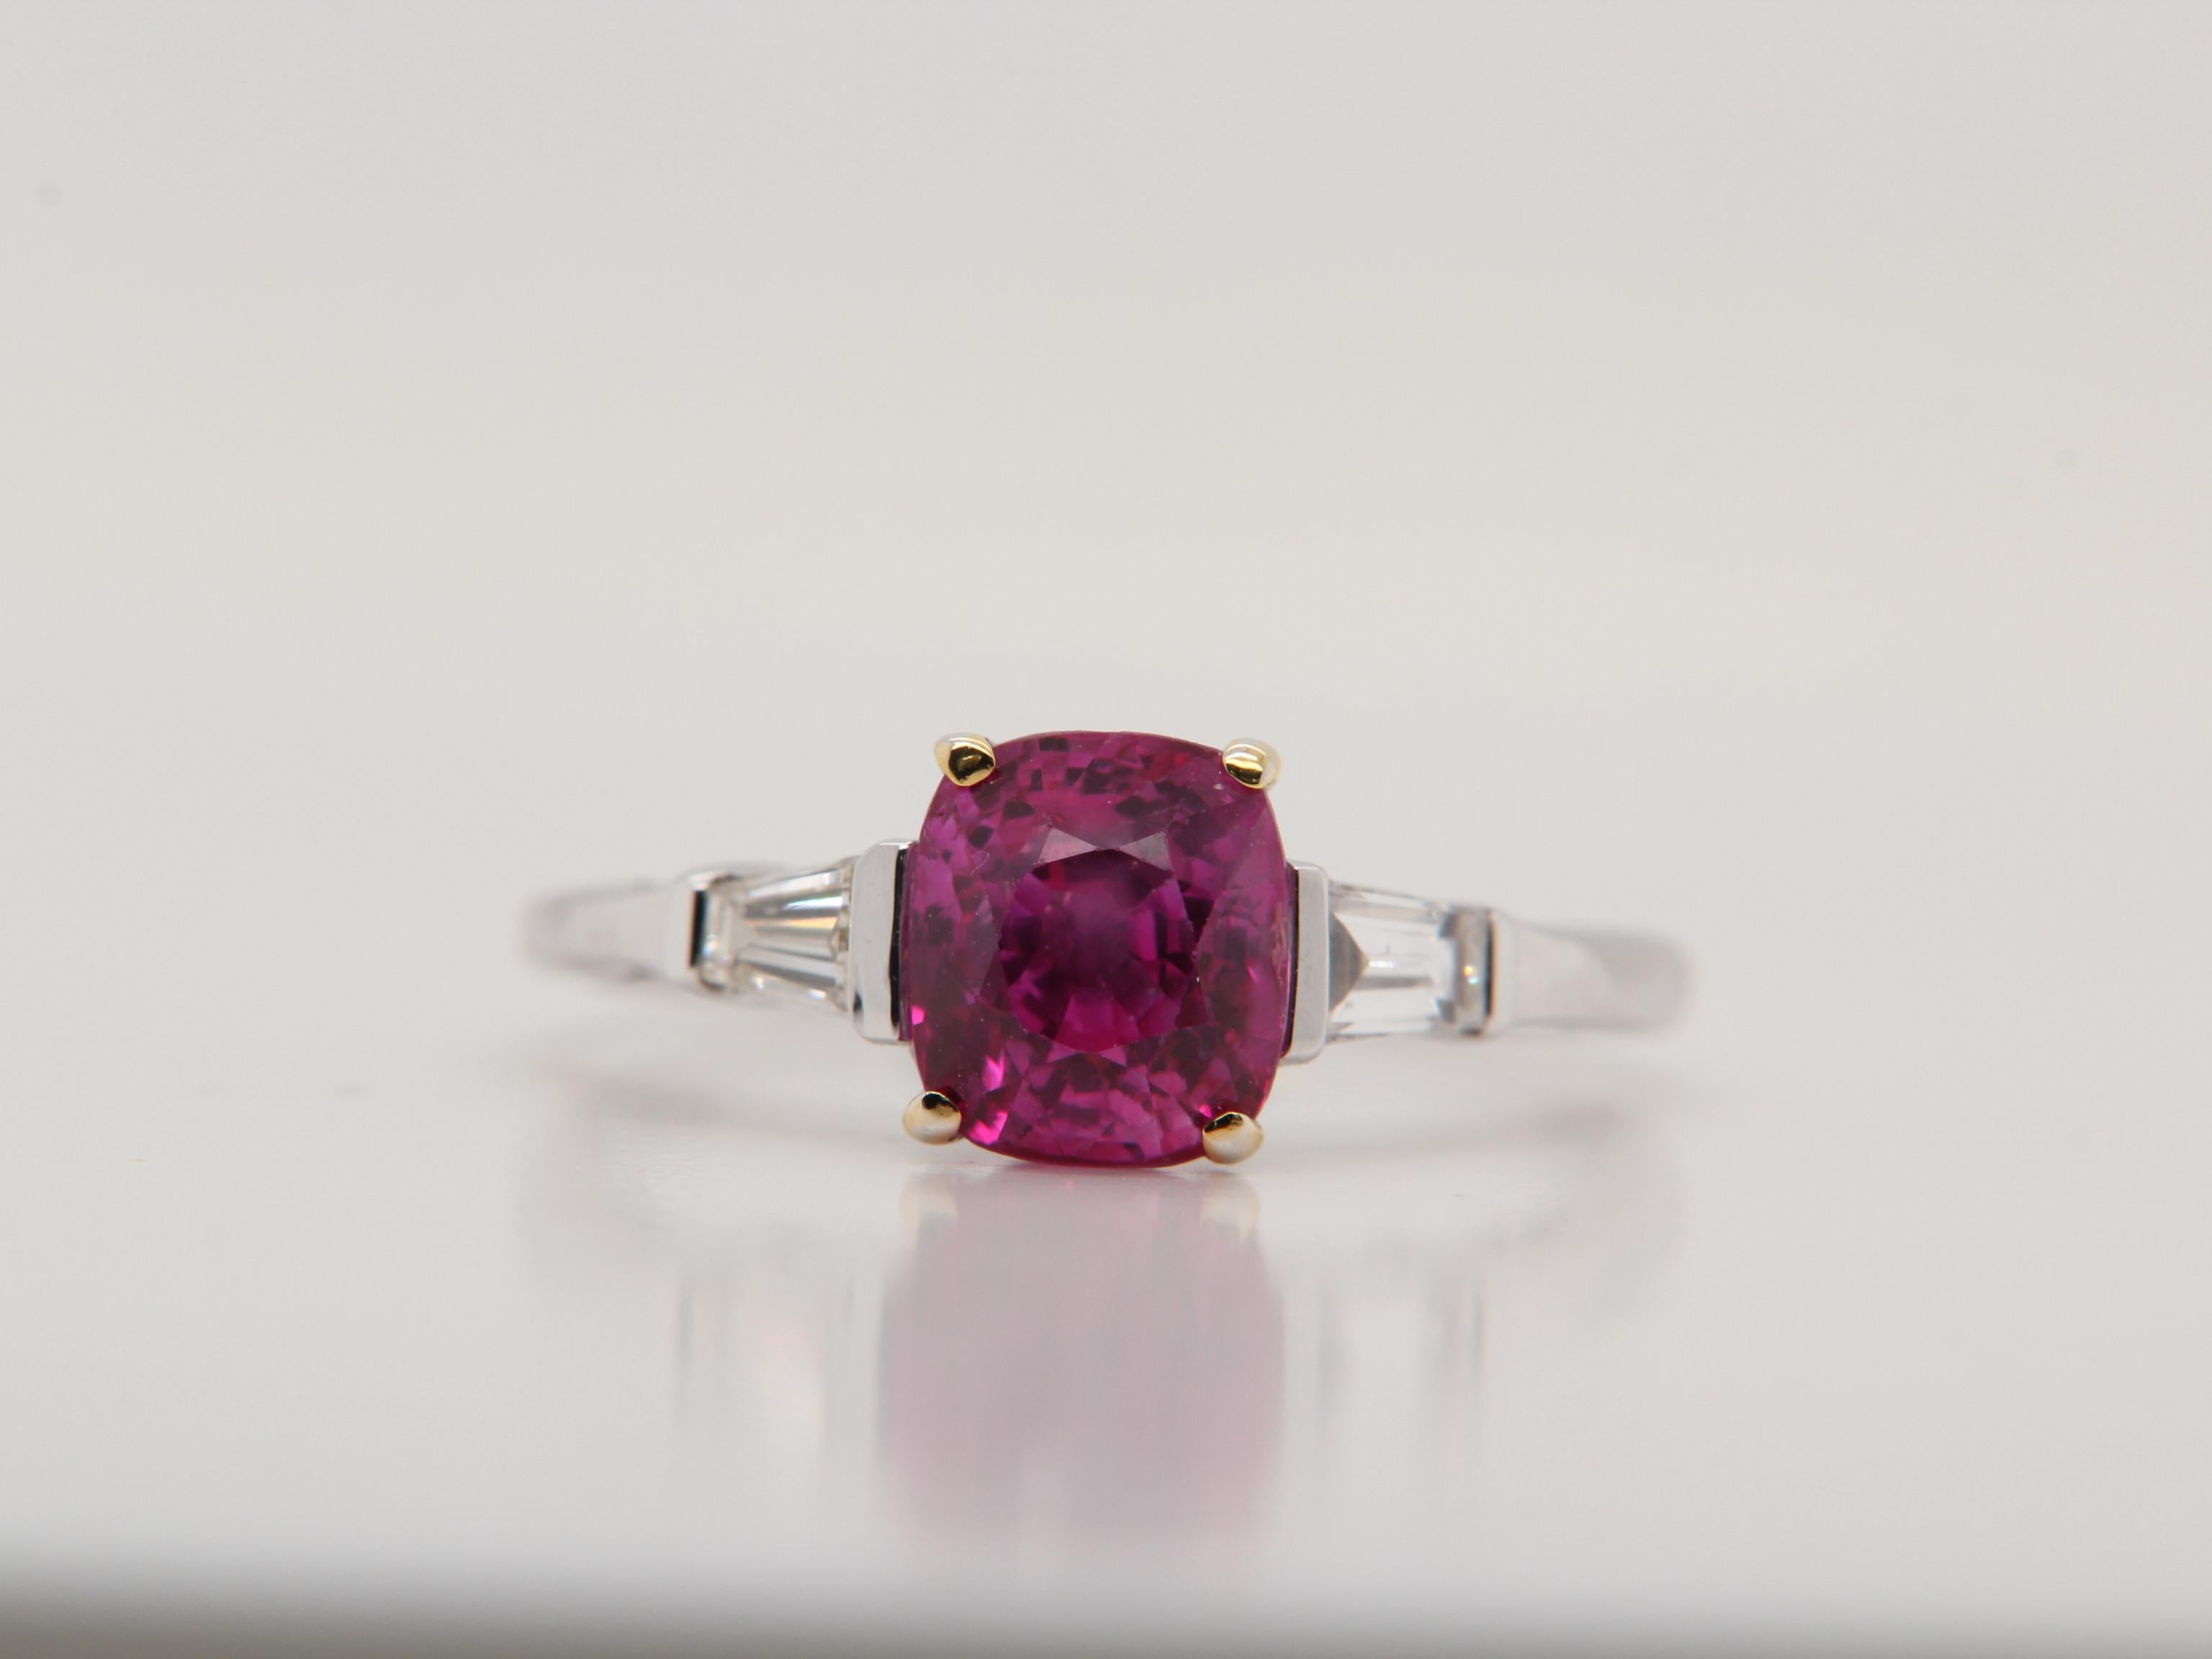 A new 2.30 carat Burmese ruby ring made in 18 Karat gold. The ruby is certified by Gem Research Swisslab (GRS) as natural, unheated, 'Pinkish-Red', and from the mine 'Mogok'. The total diamond weight is 2.01 carats and the total weight of the ring